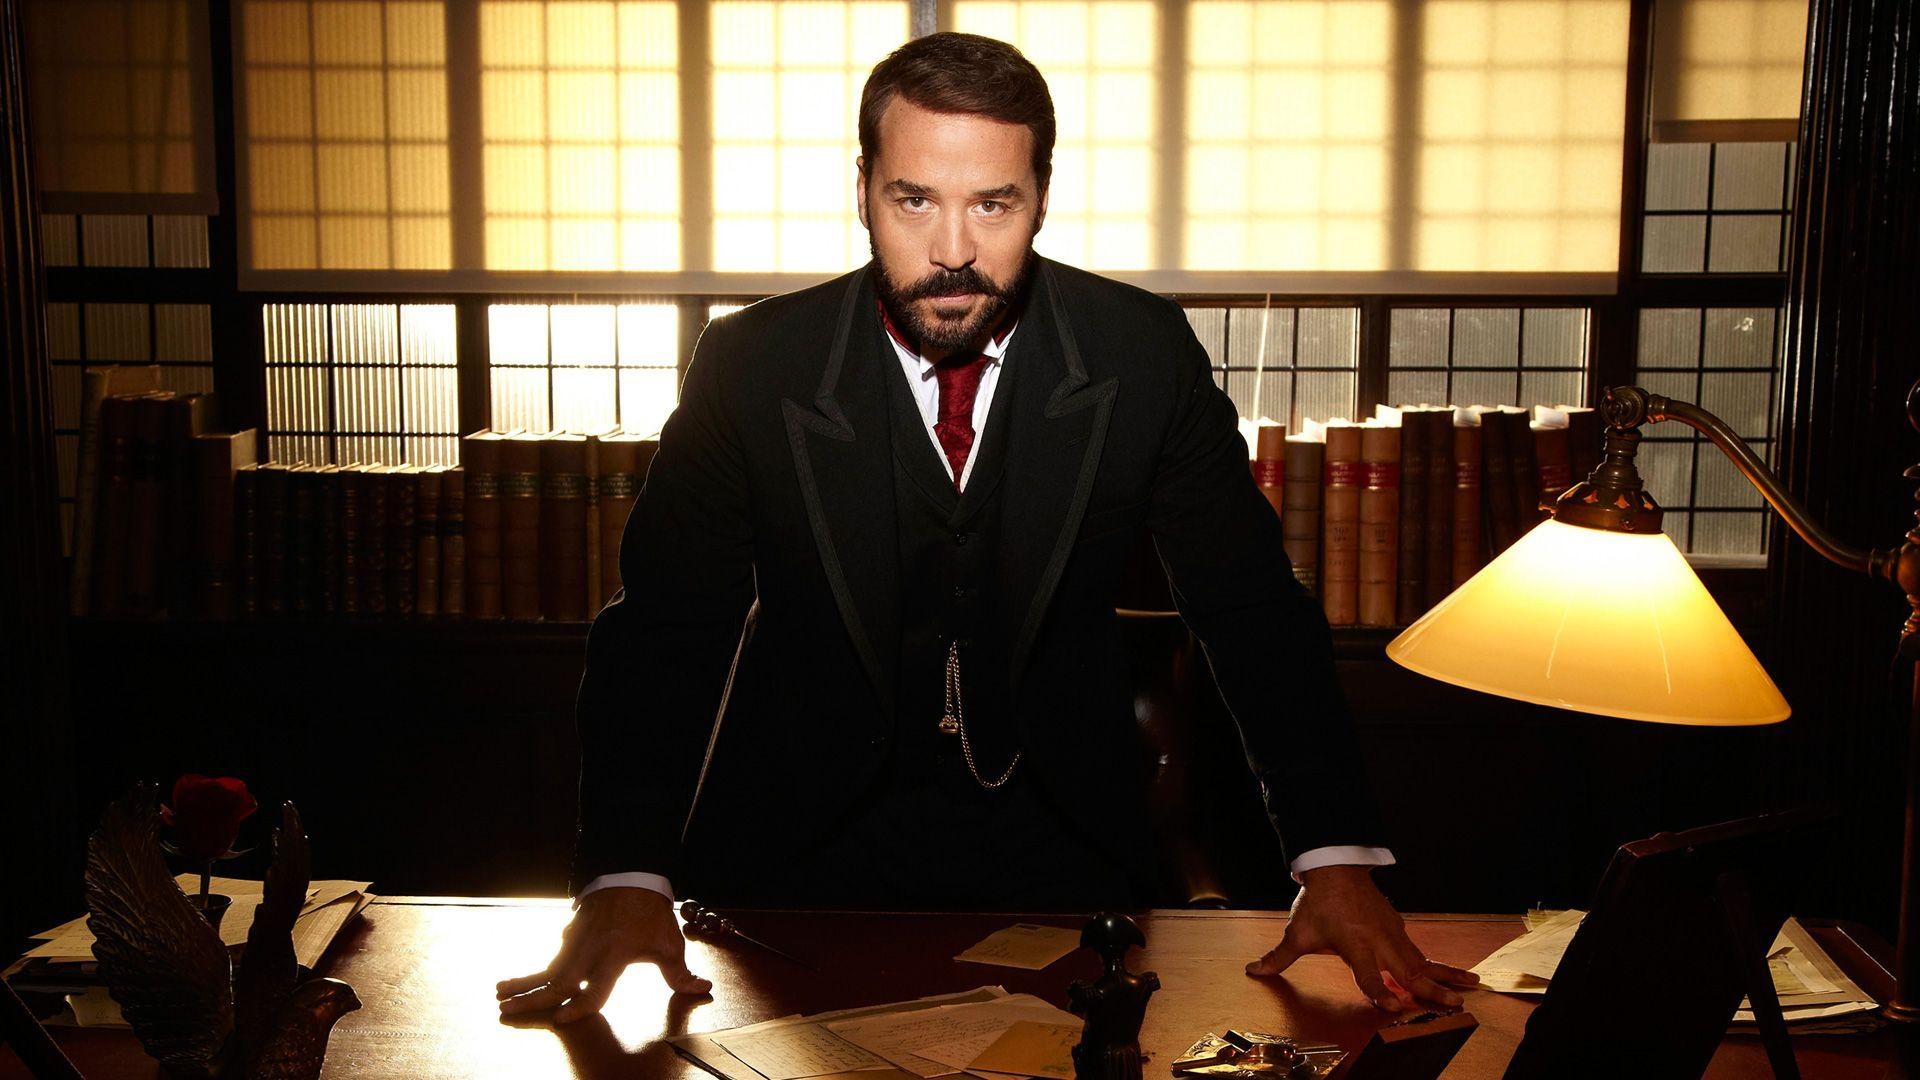 Jeremy Piven: A British period drama television series Based on	Shopping, Seduction & Mr Selfridge by Lindy Woodhead. 1920x1080 Full HD Wallpaper.